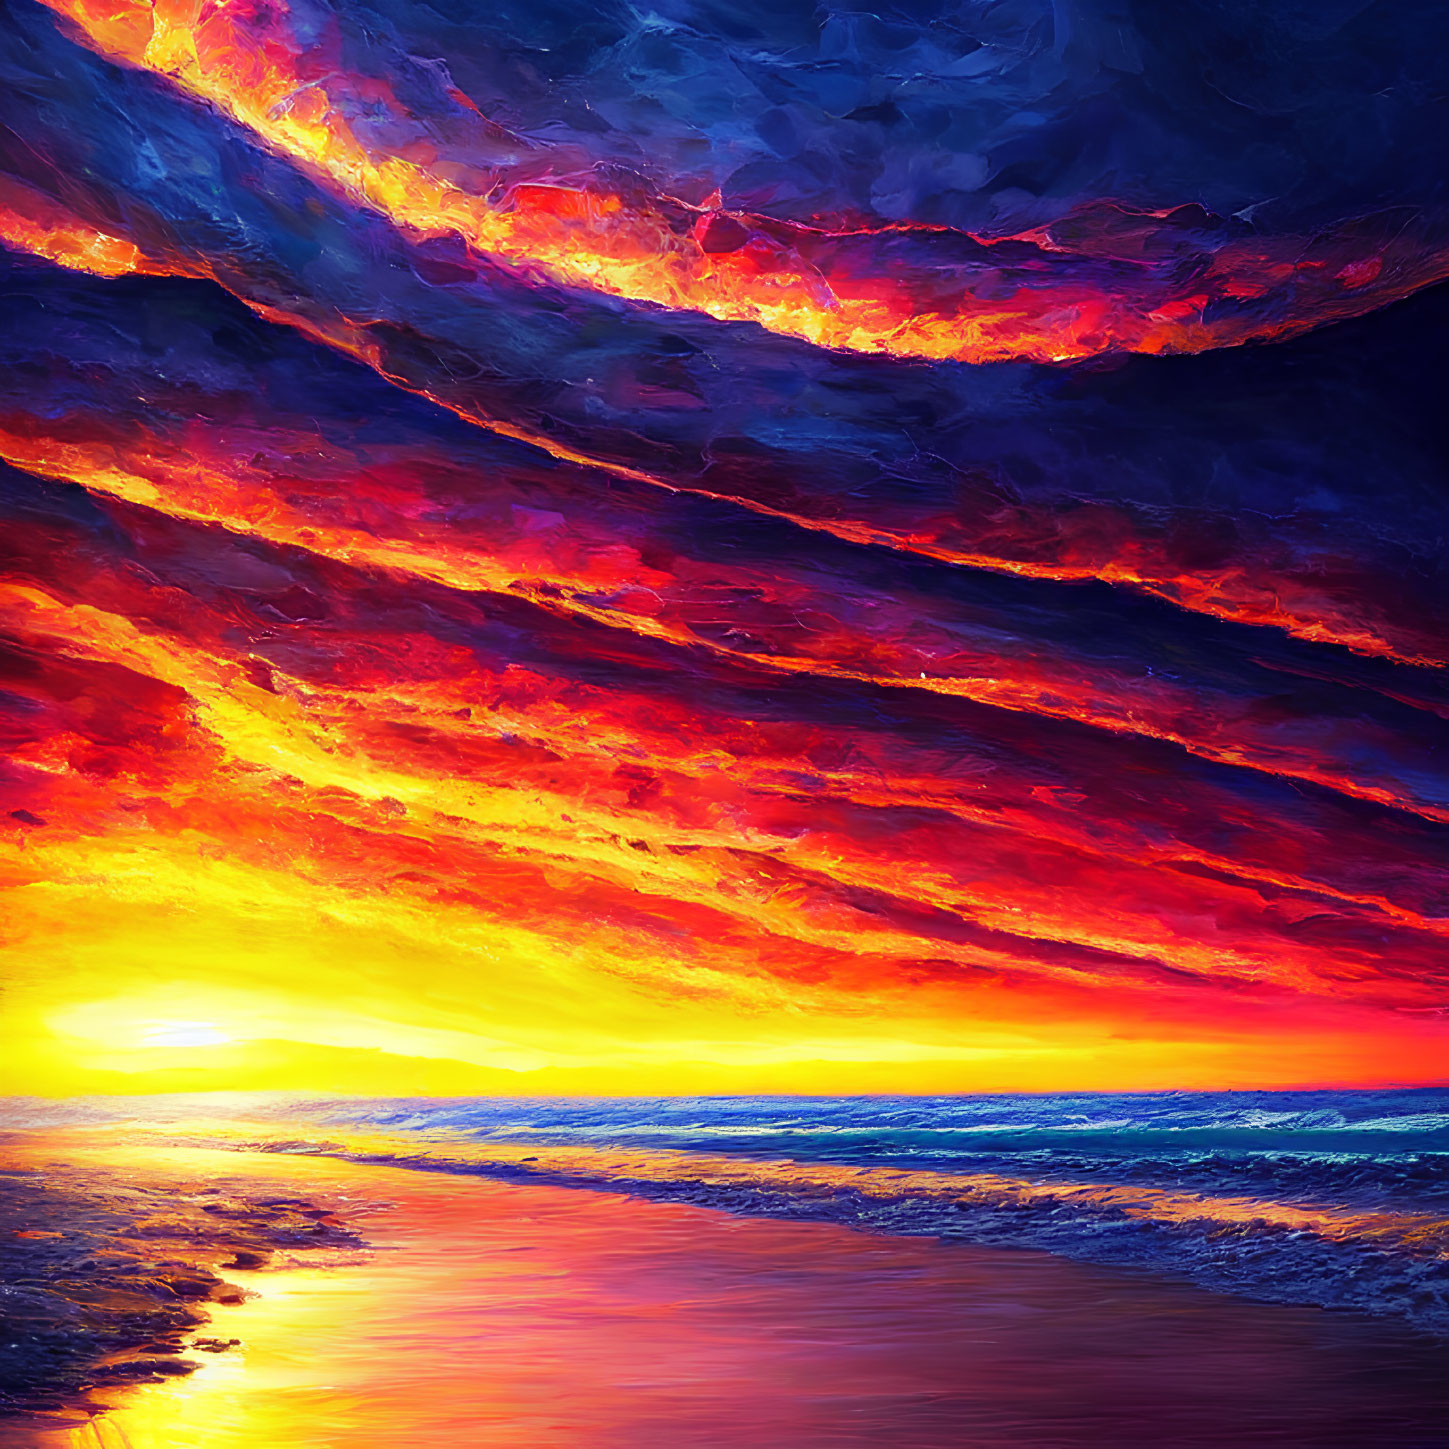 Vivid digital painting: Sunset with red and orange clouds reflected on ocean